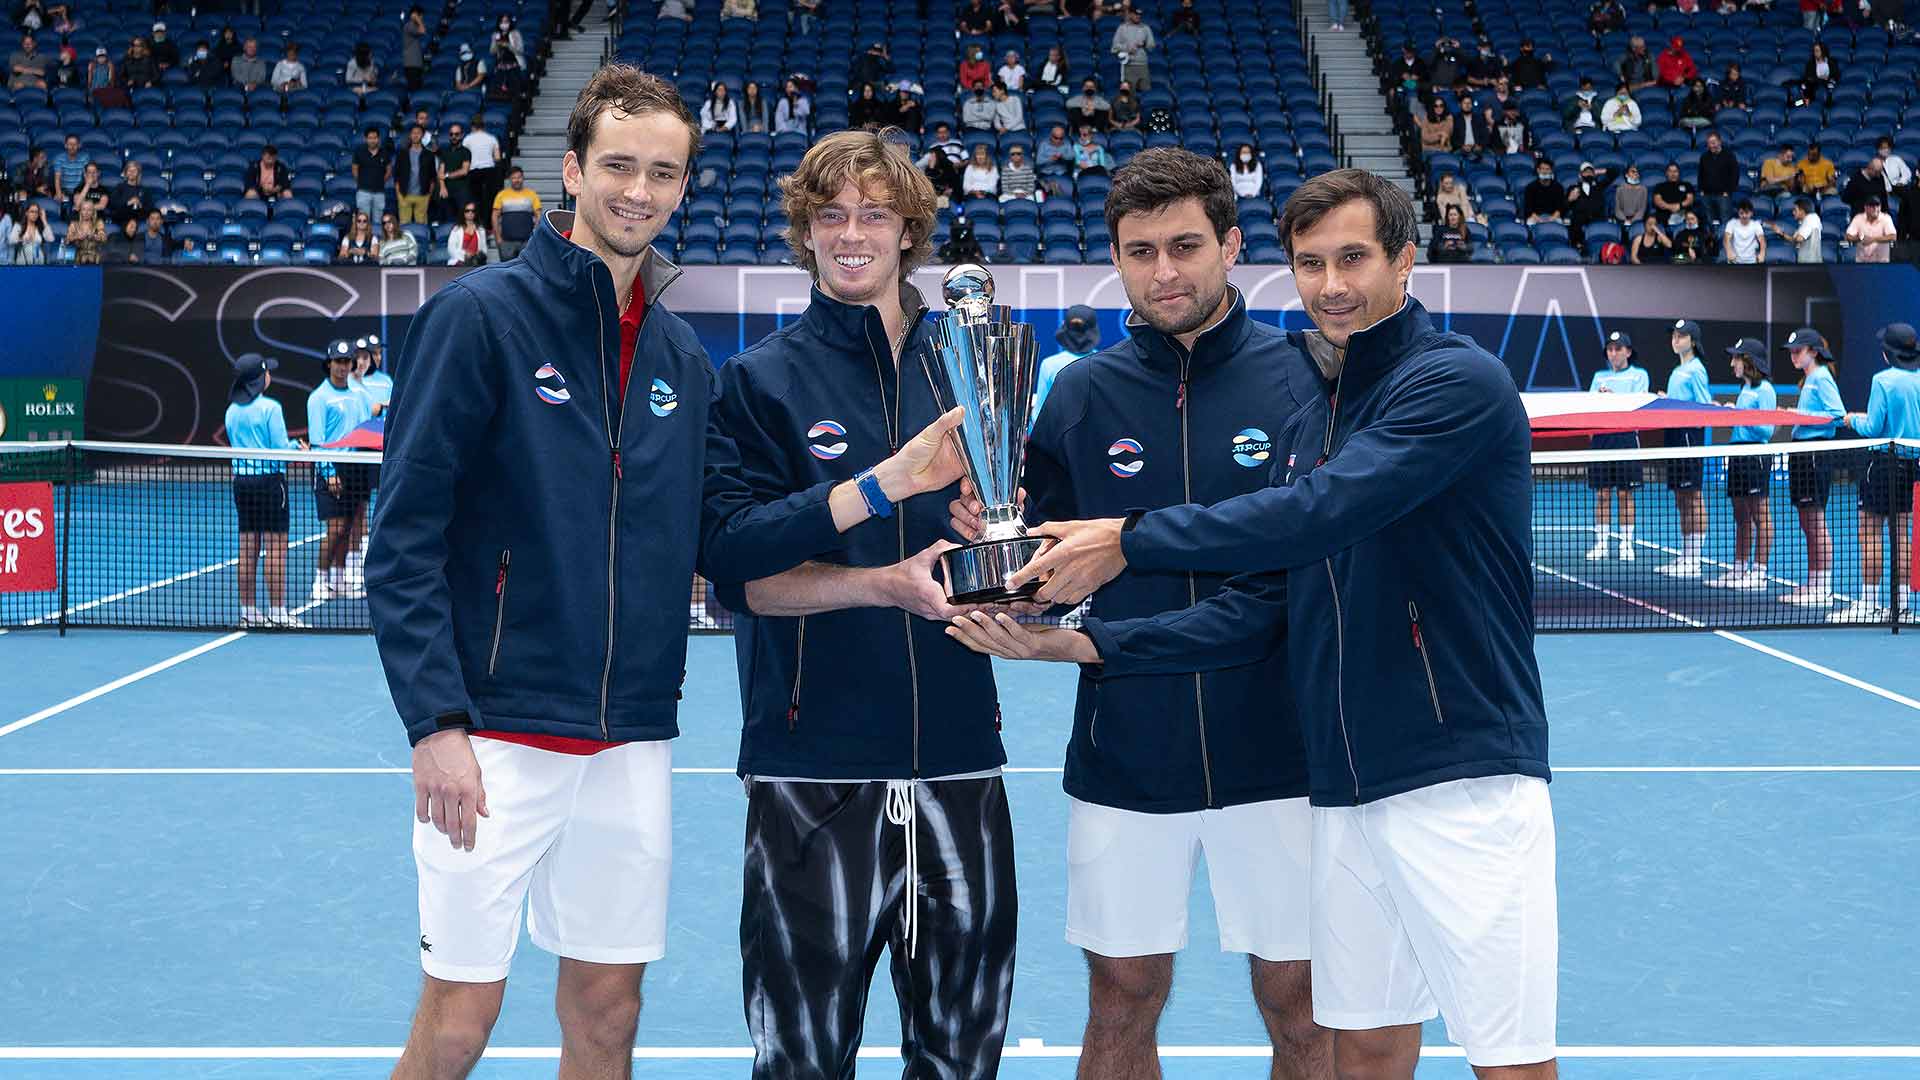 Atp cup